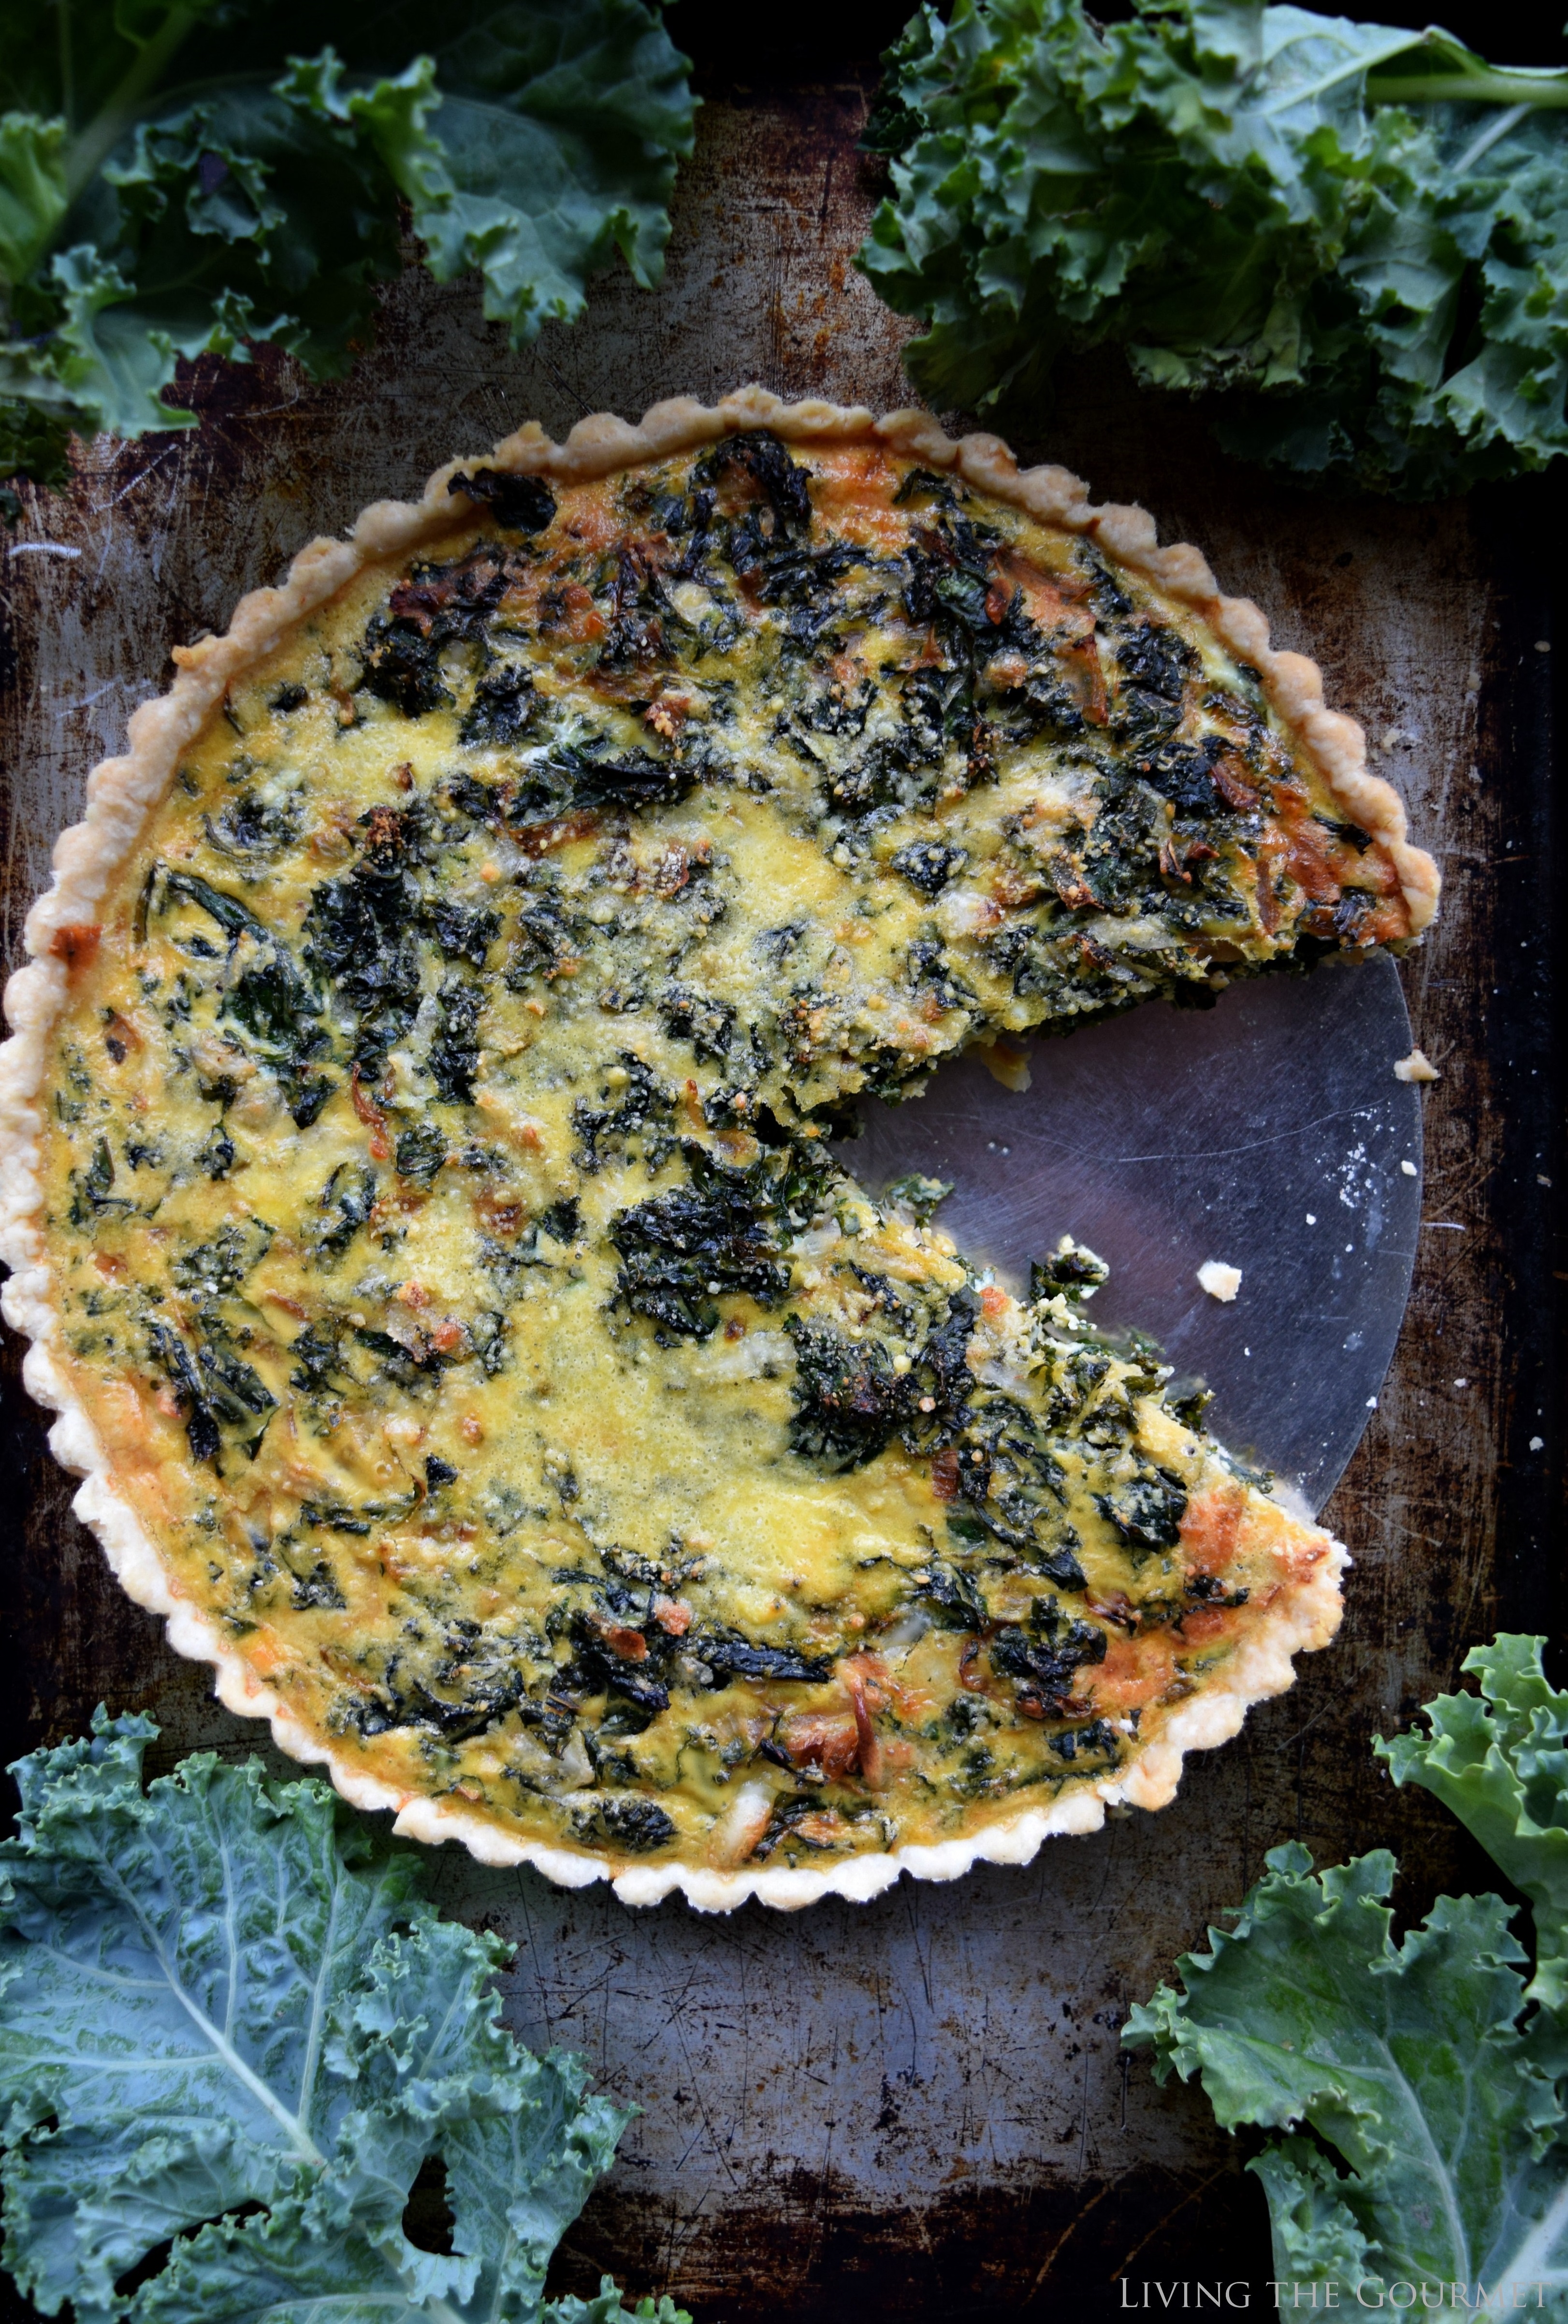 Living the Gourmet: Kale and Provolone Quiche